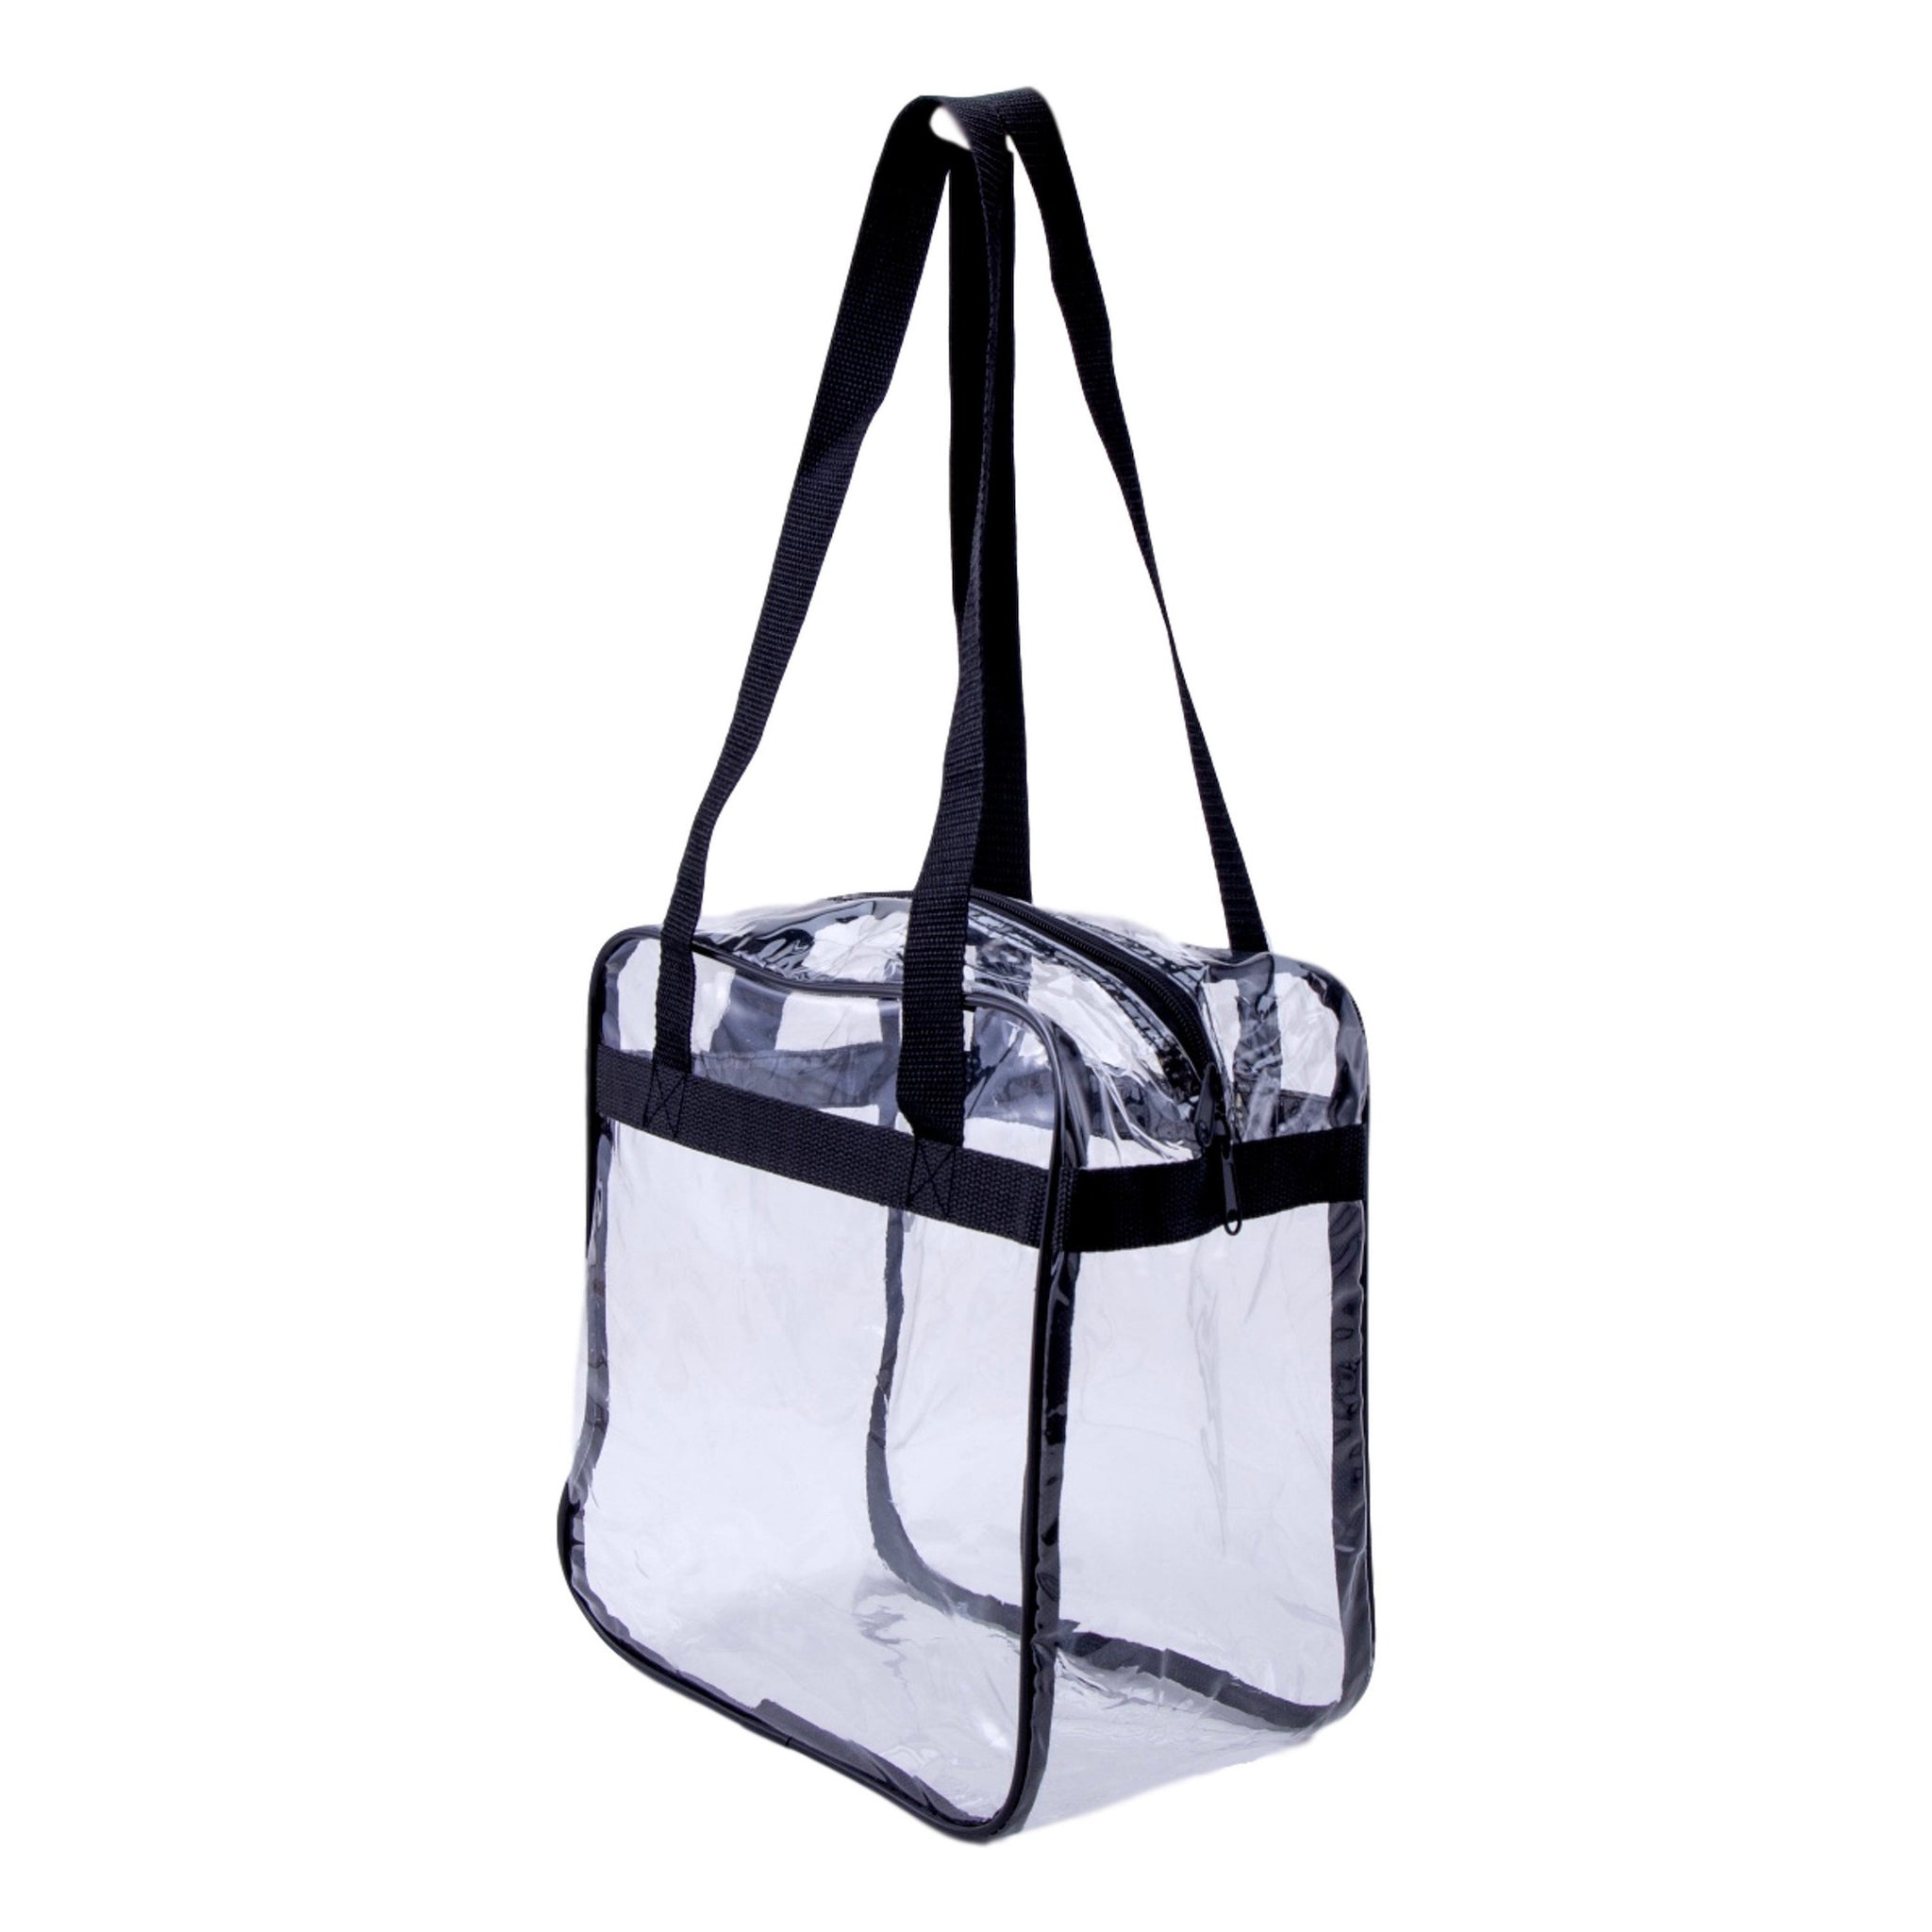 Clear tote bag with leopard print handles. 60% PVC 40% PU. Measuring  approximately 15 x 14 in size., 780373